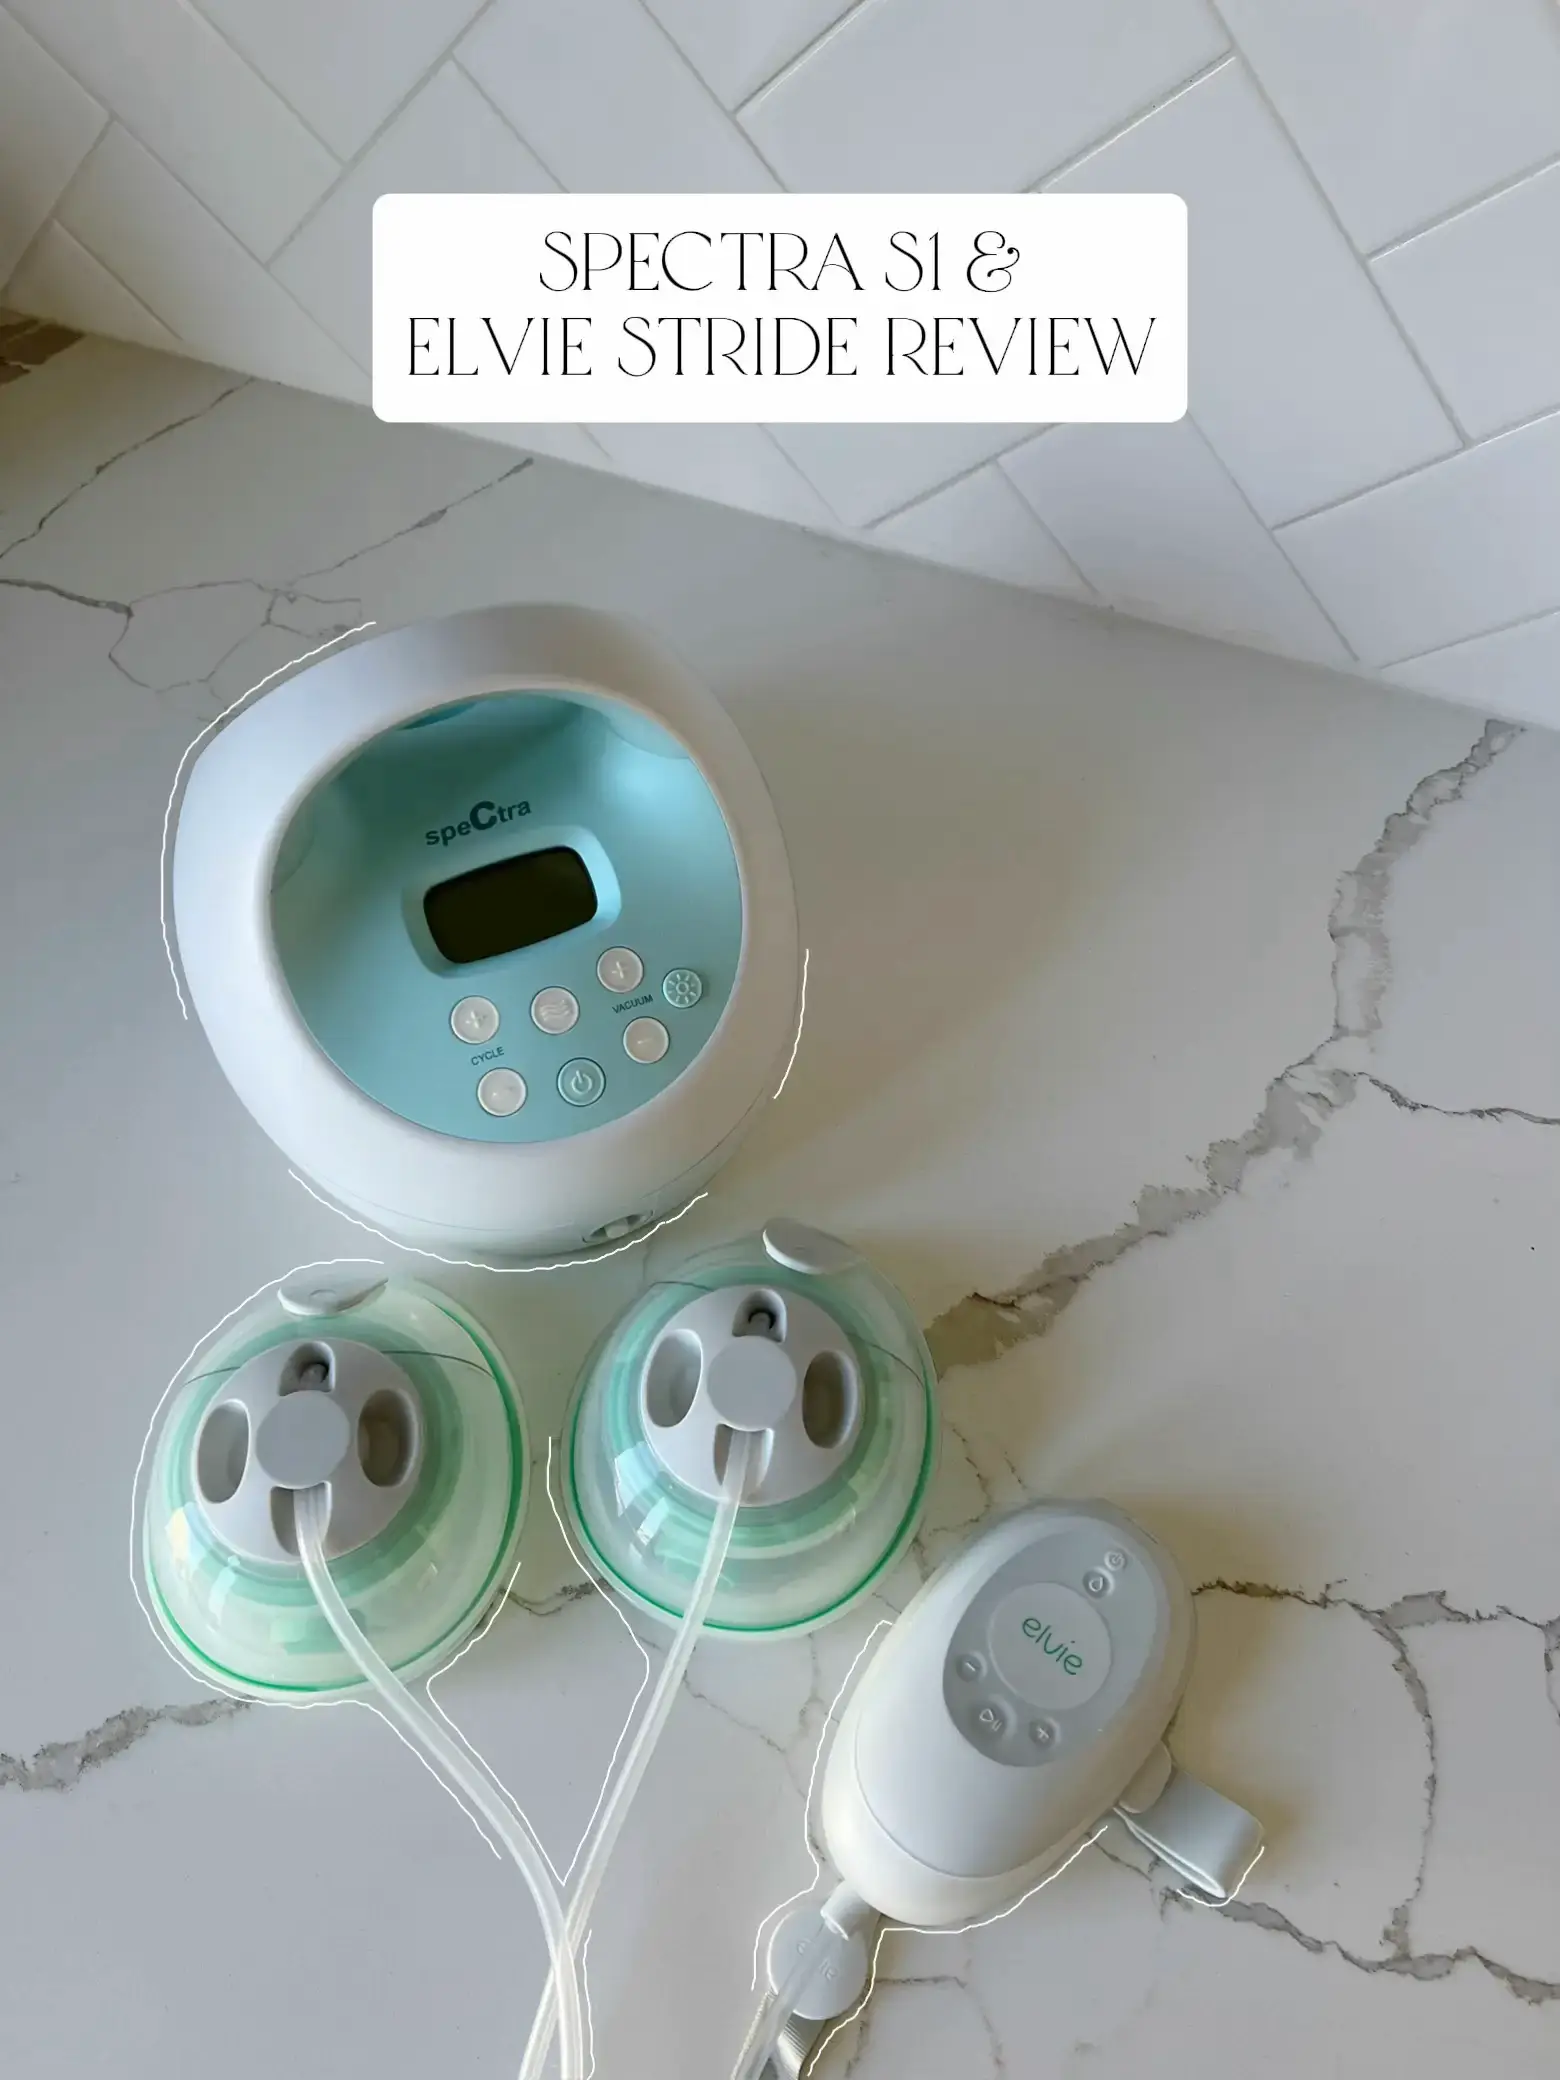 NEW! Elvie Stride Handsfree Pump Unboxing and Review! - The Breastfeeding  Shop 